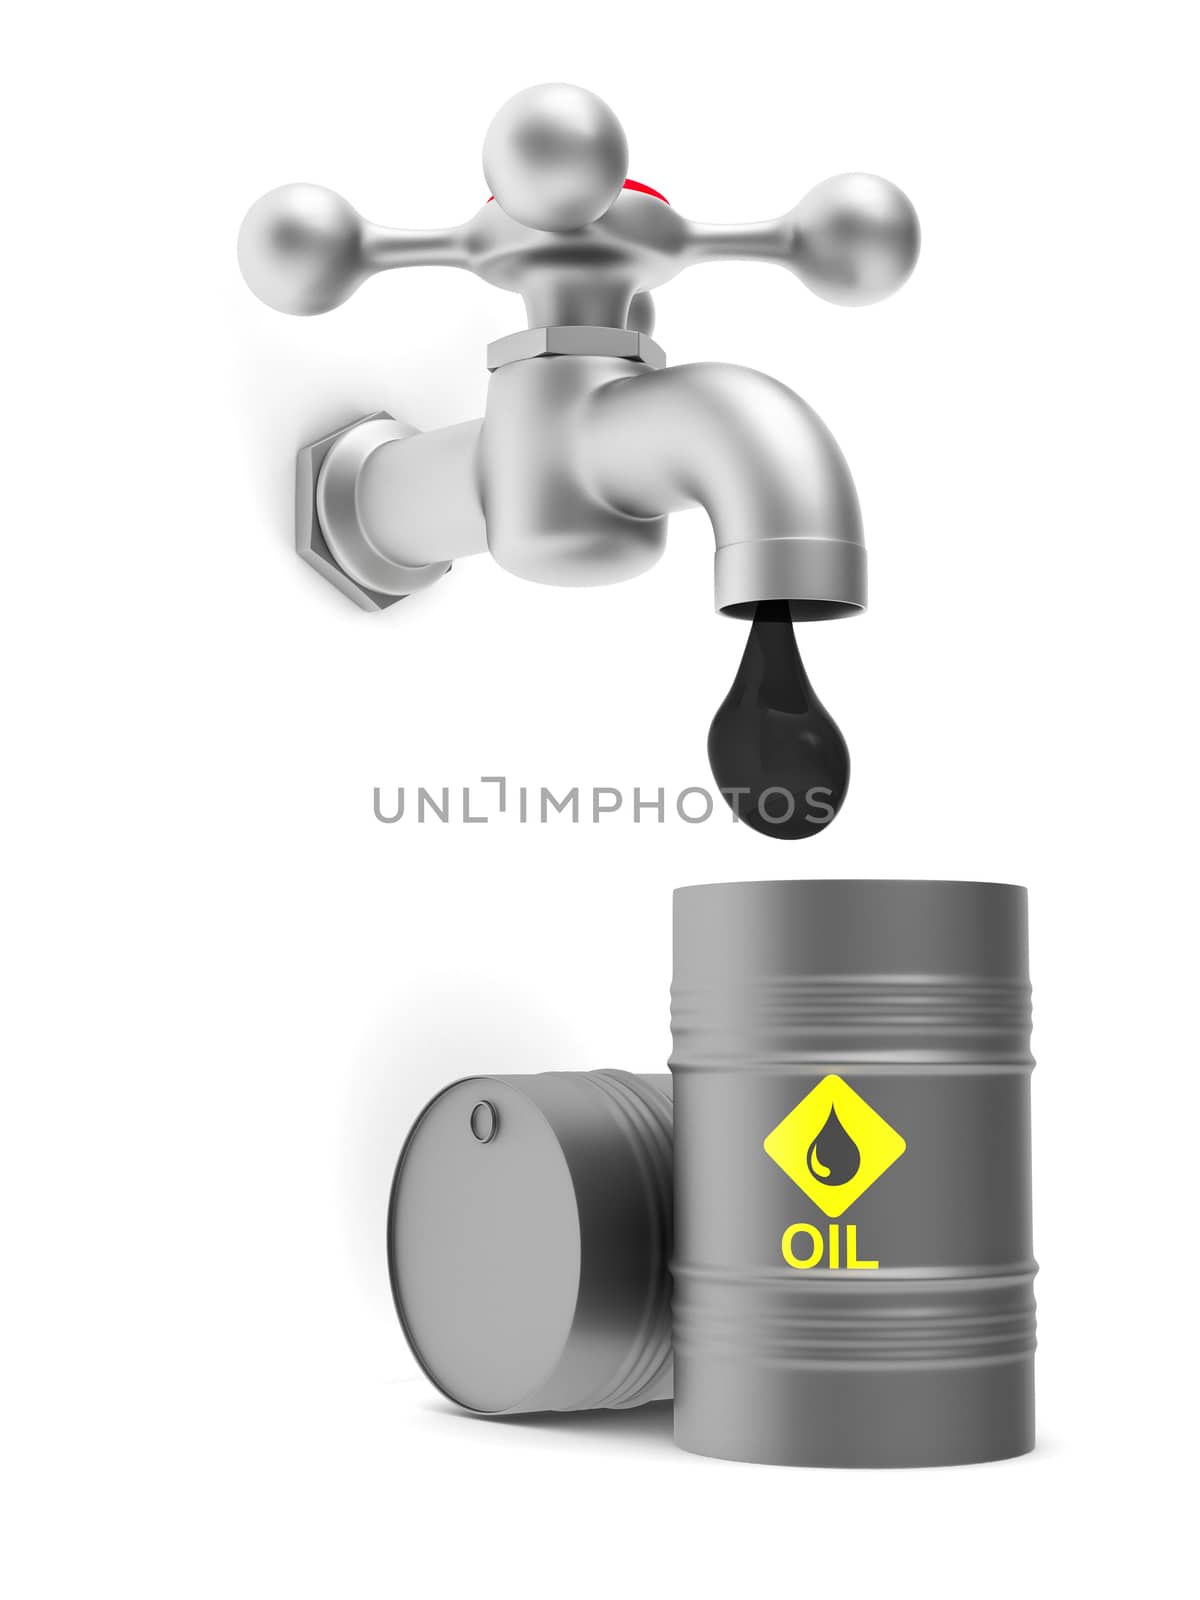 concept oil production on white background. Isolated 3D image